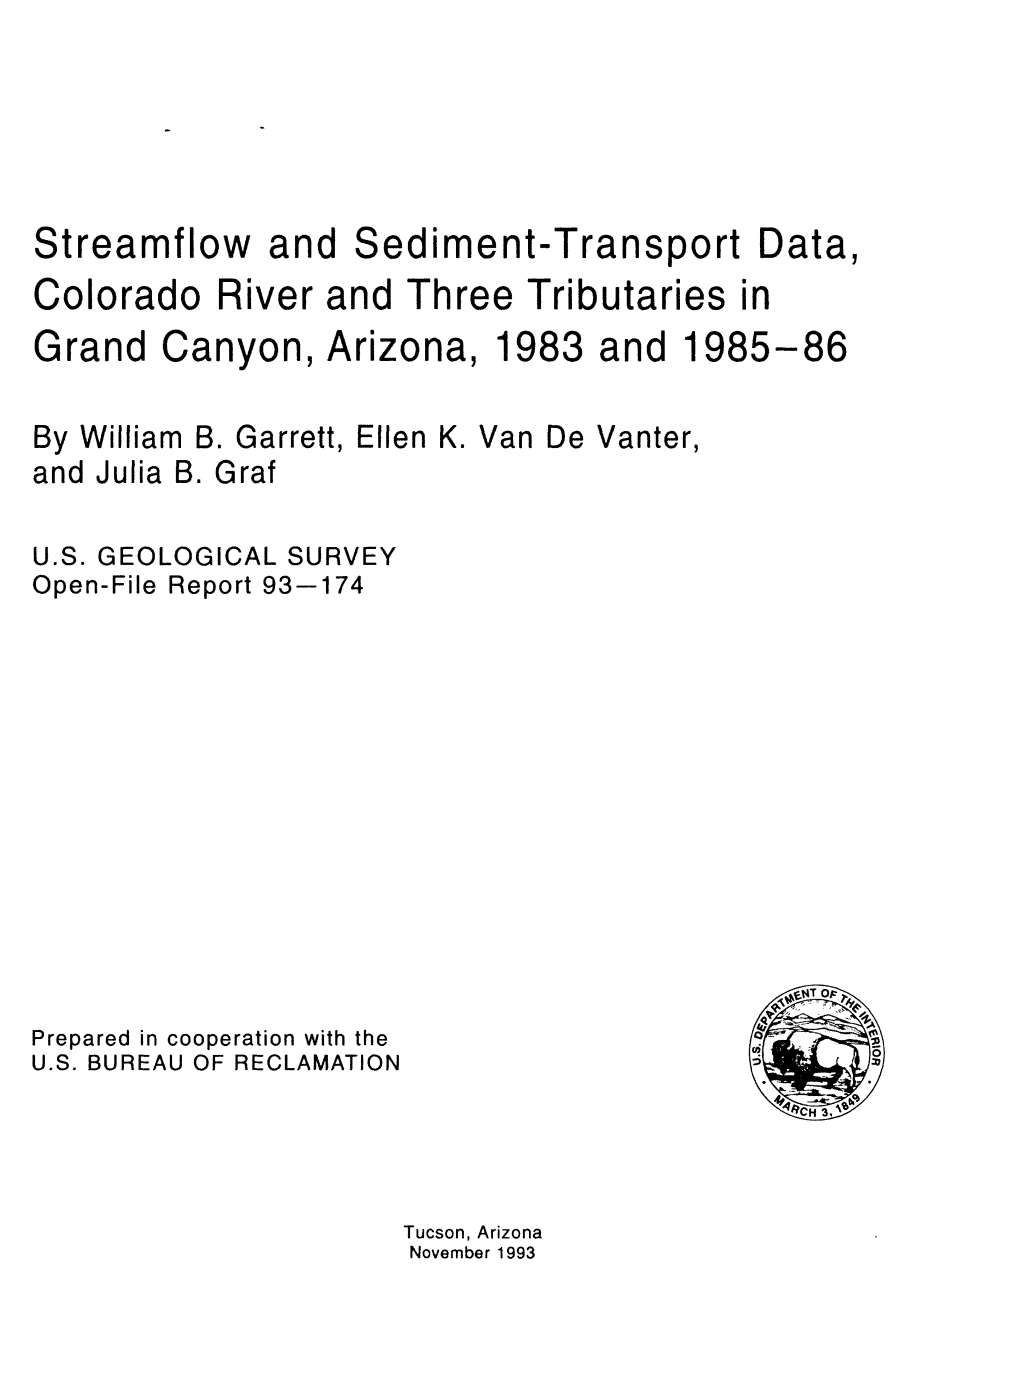 Streamflow and Sediment-Transport Data, Colorado River and Three Tributaries in Grand Canyon, Arizona, 1983 and 1985-86